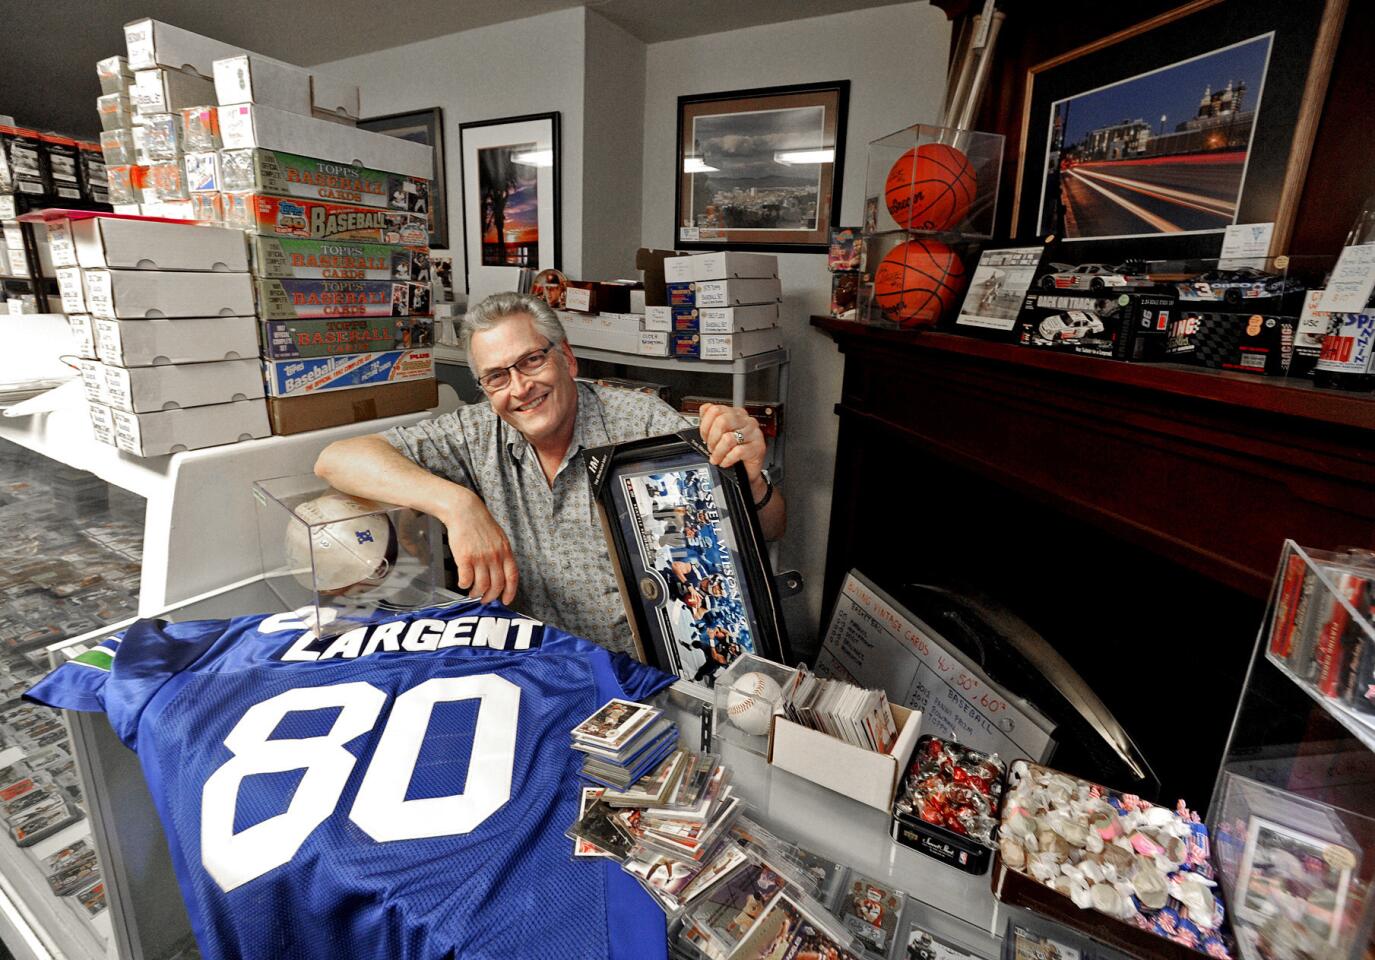 Alan Bisson holds trading night once a month at his store, Spokane Valley Sportscards, which he operates out of a former home in eastern Washington.